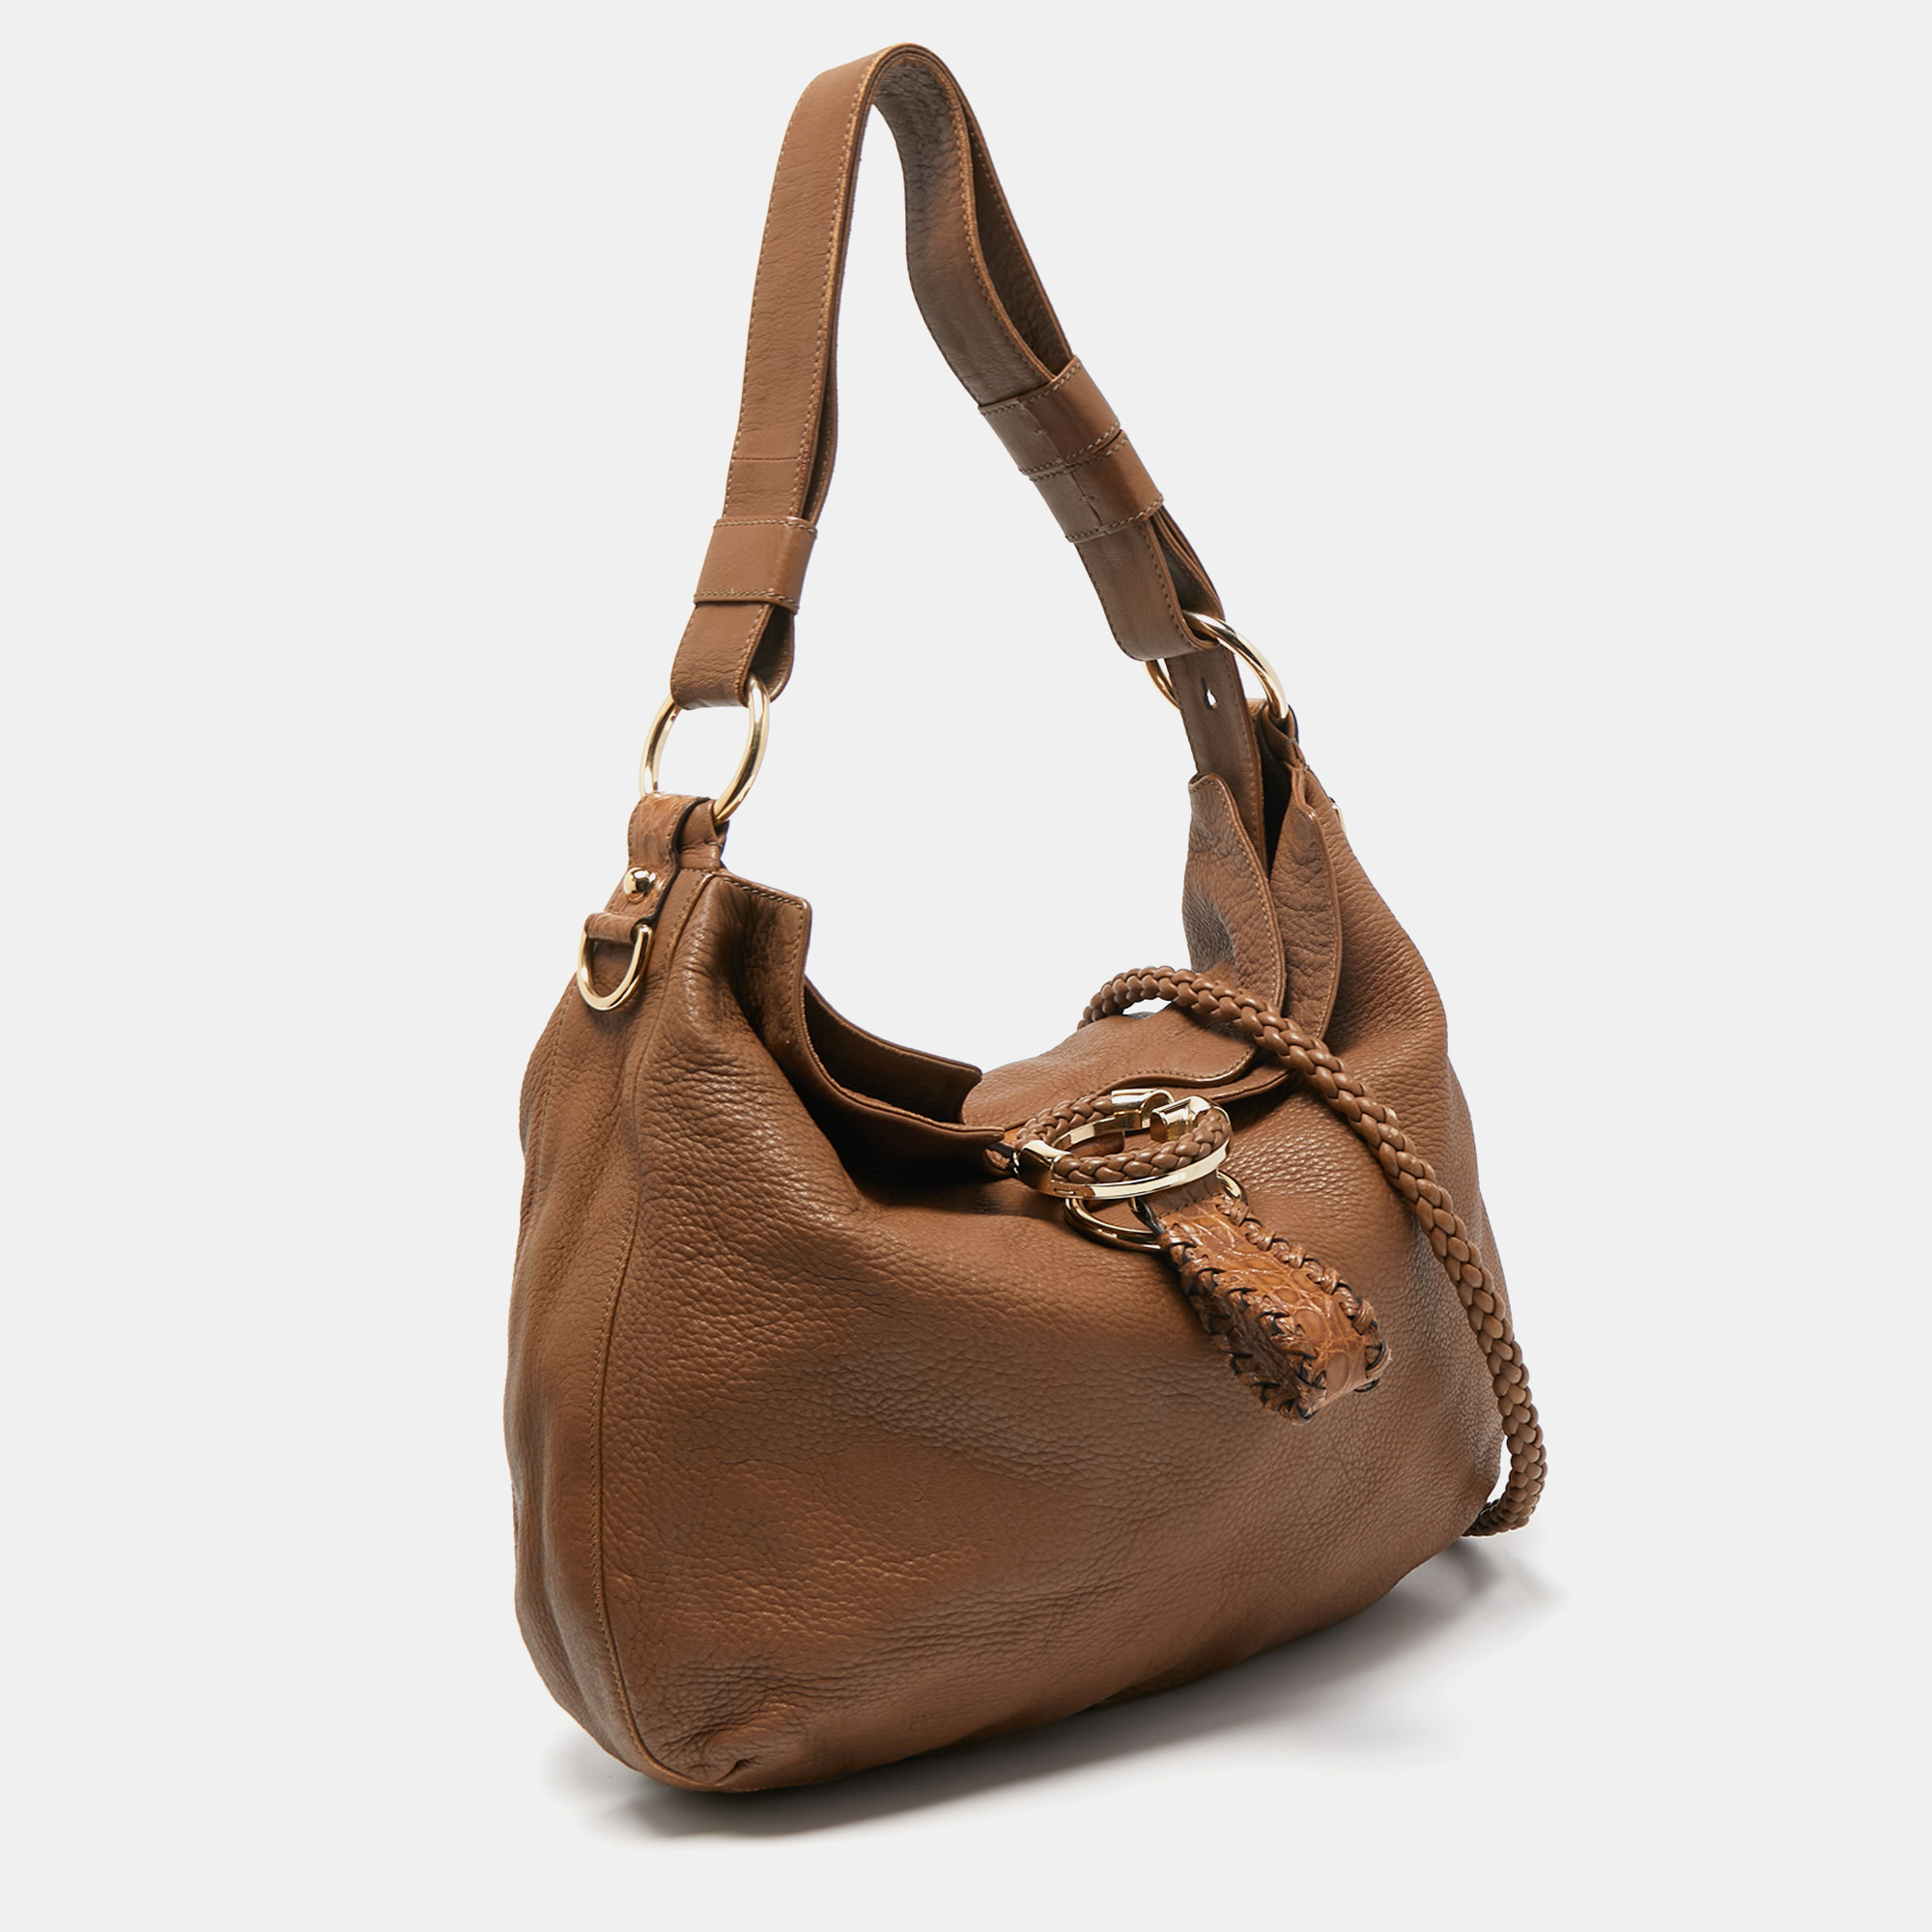 Gucci Brown Leather And Alligator Hobo